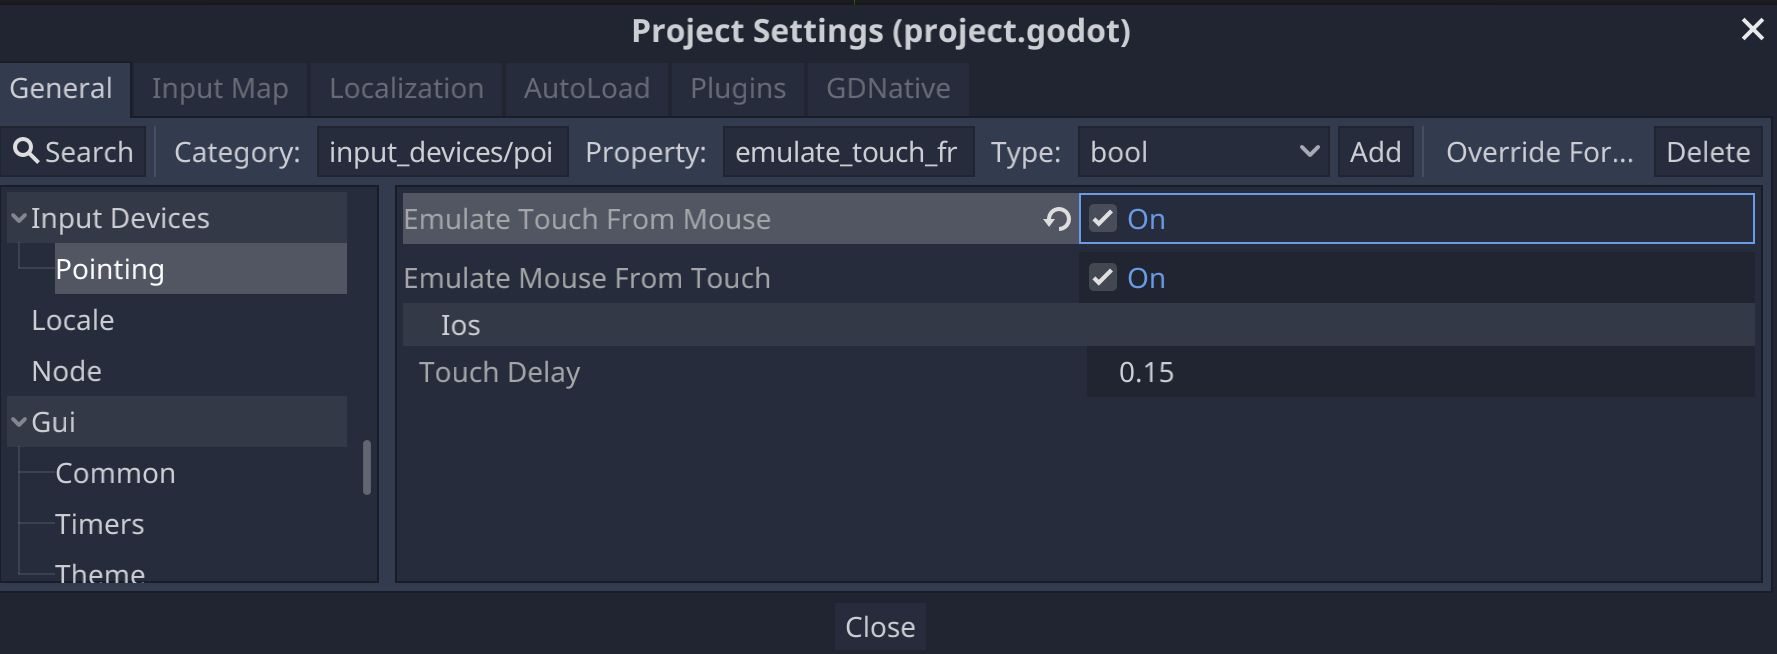 Godot 的“Project Settings”中的“Input Devices”